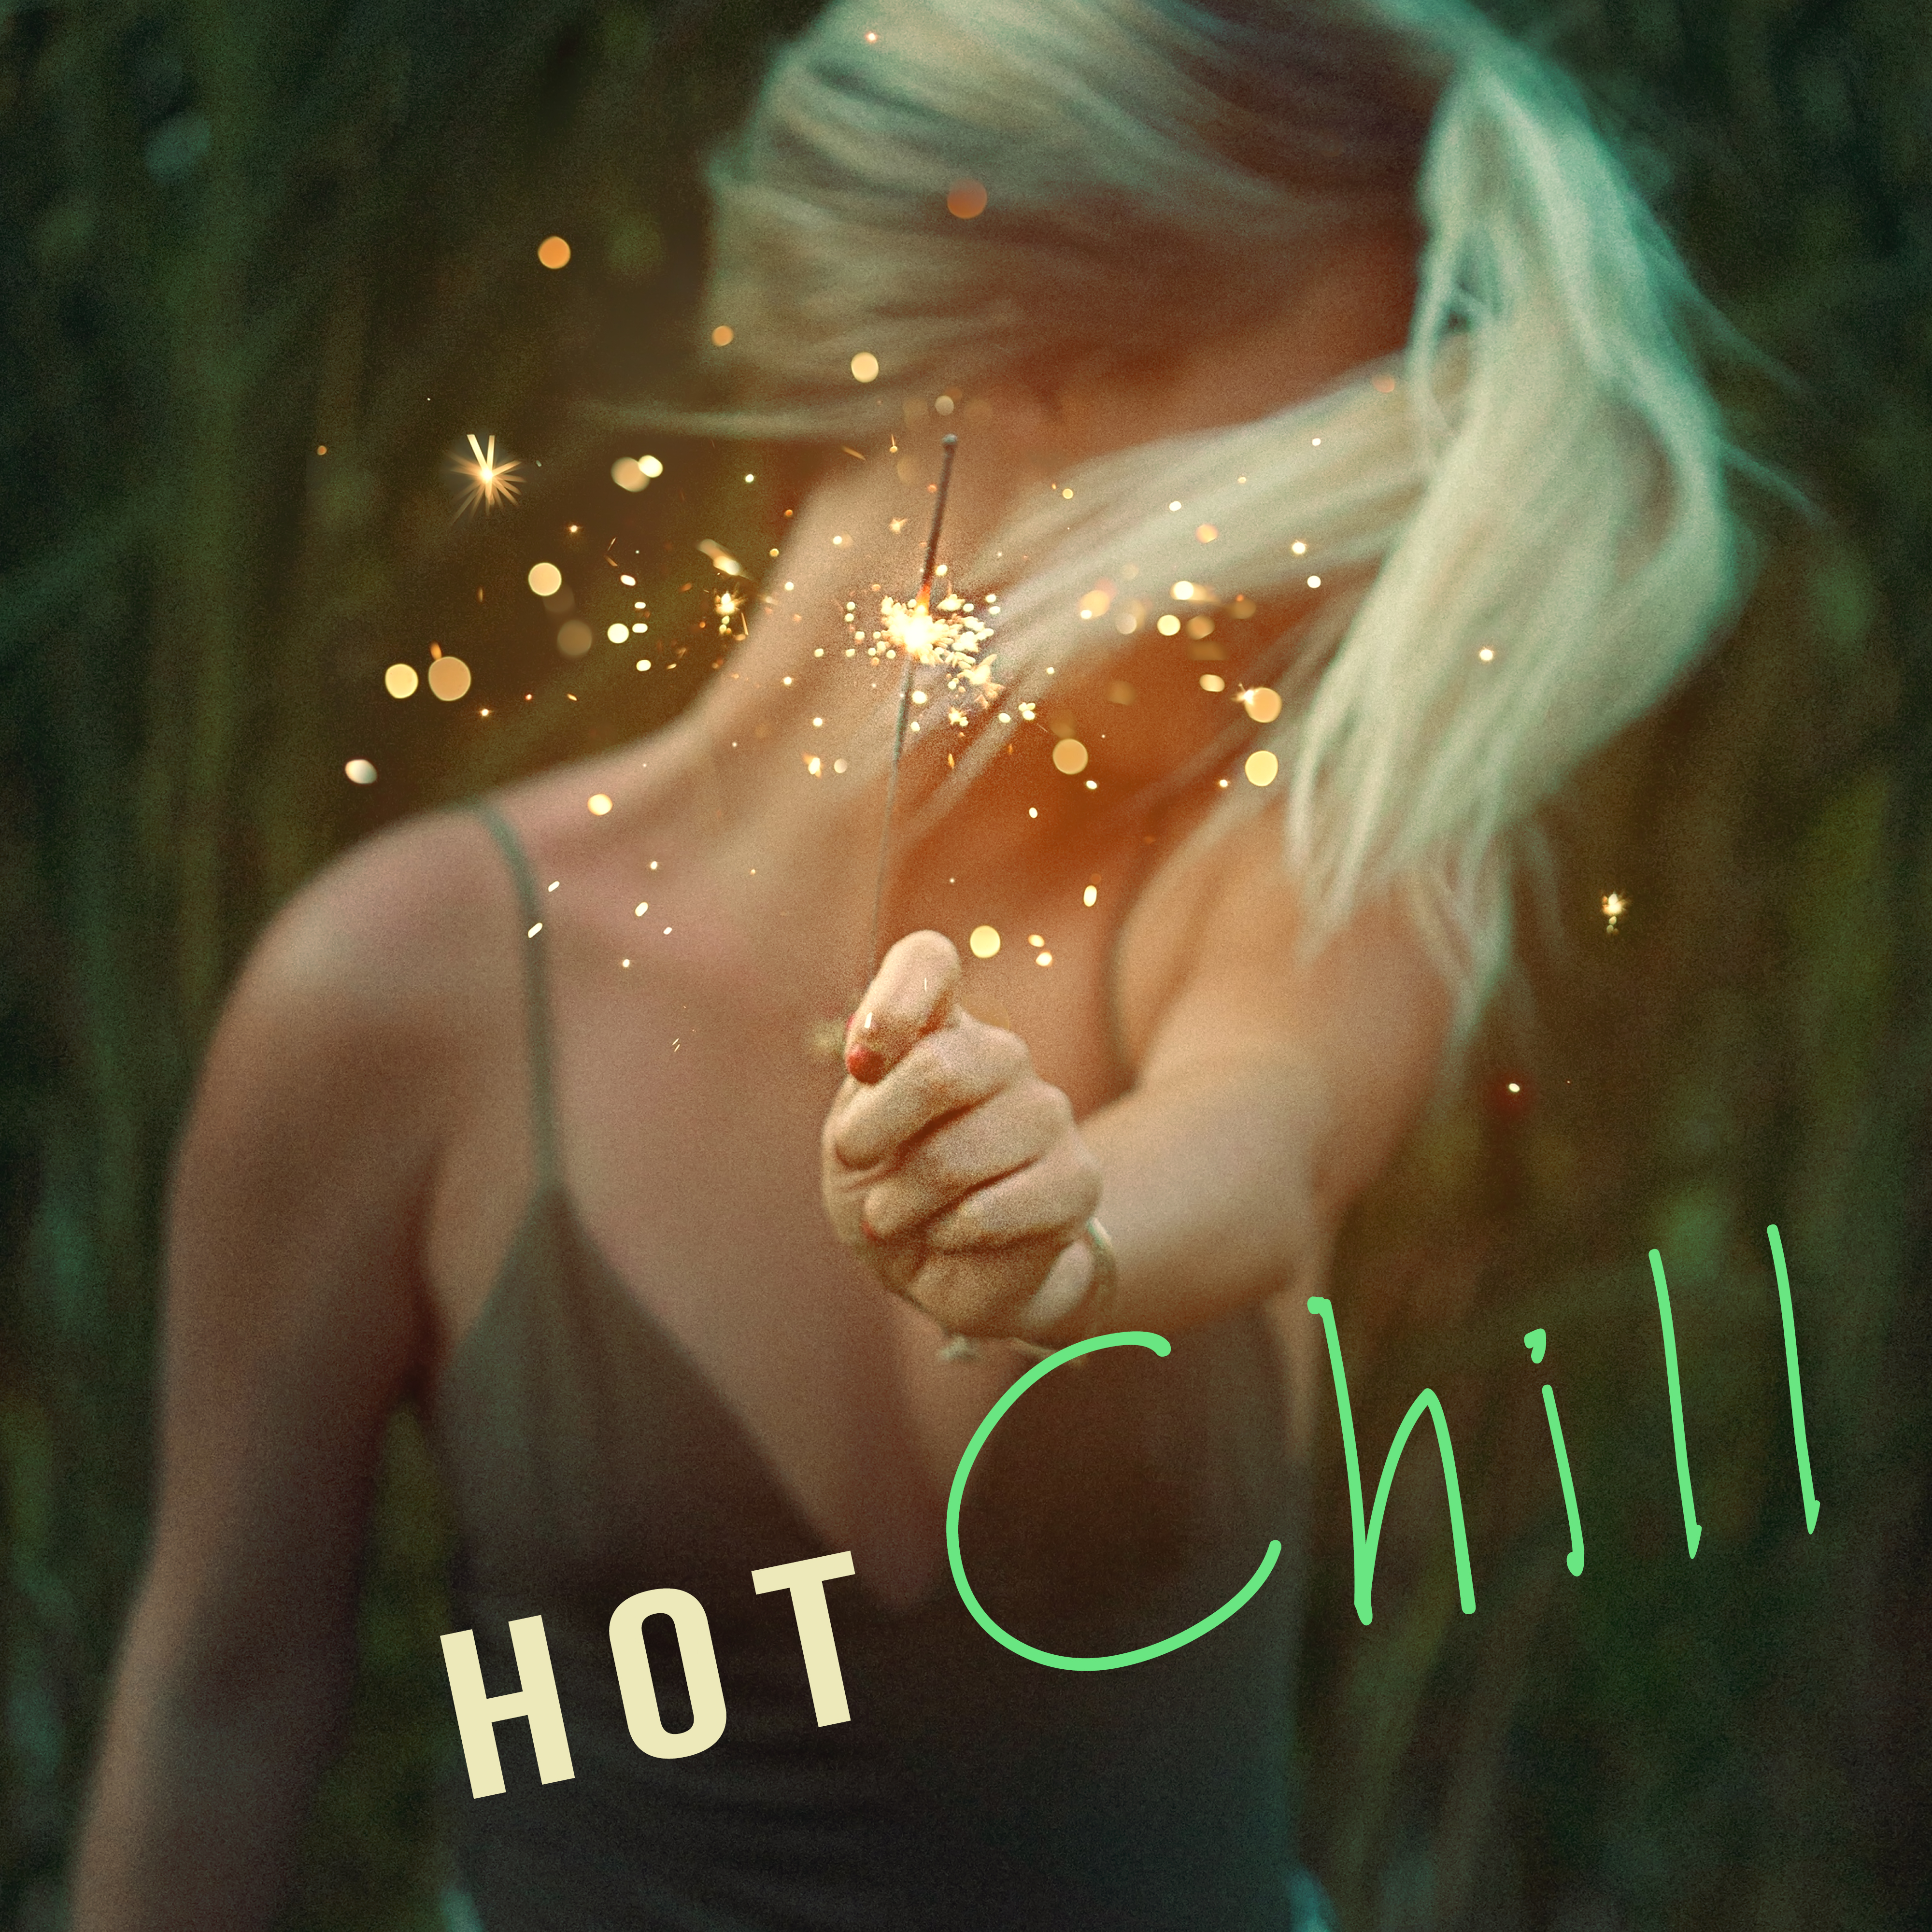 Hot Chill  Spa Lounge, Best Chill Out Music, Easy Listening Chill, Lounge Tunes, Chillout Hits